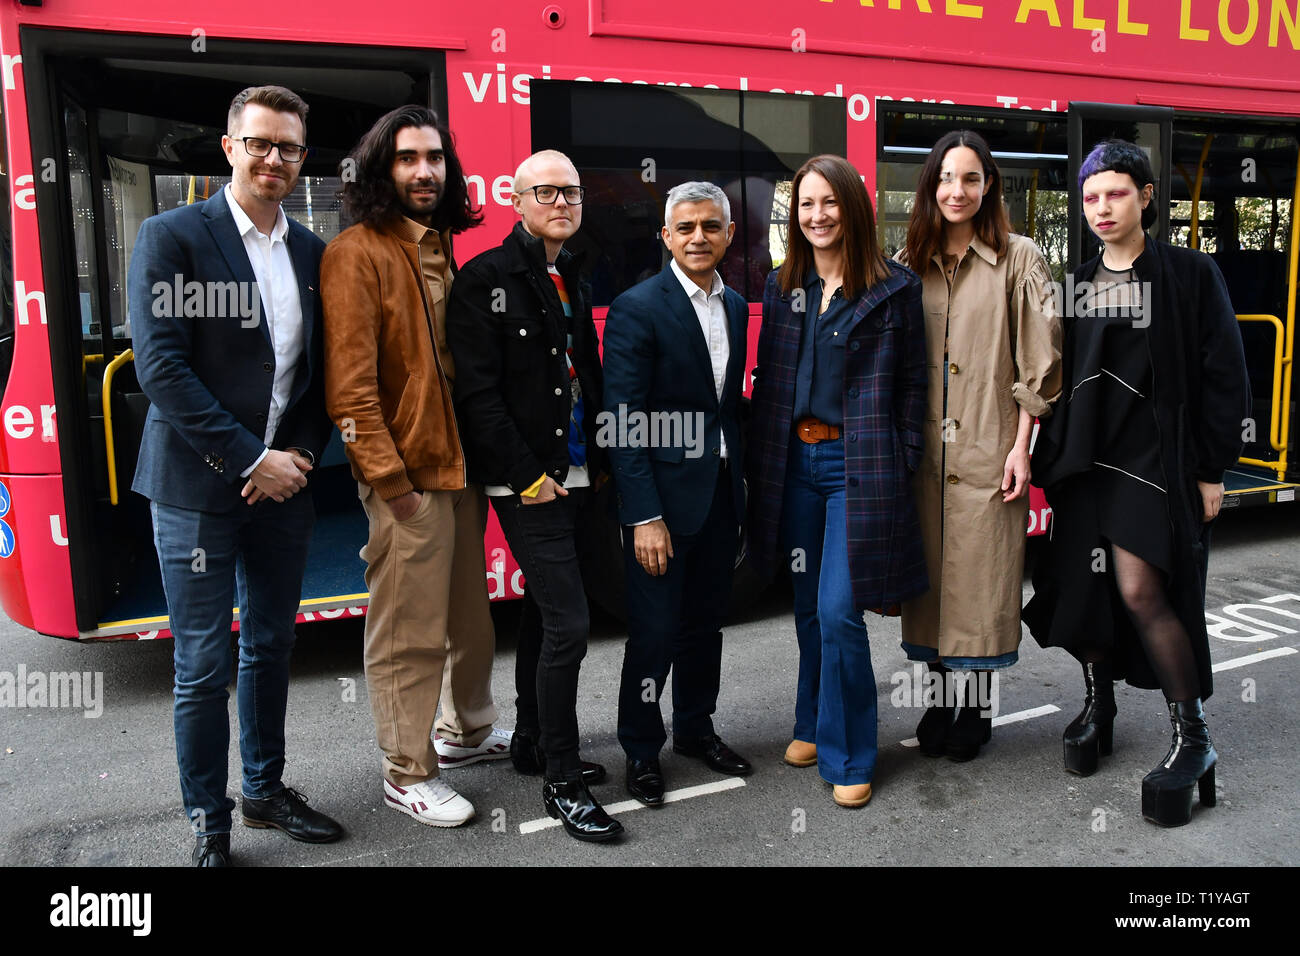 London, UK. 29th March, 2019. The Mayor of London, Sadiq Khan, launch a branded ‘We are all Londoners' bus as it begins a four-day ‘Advice Roadshow' around the capital. The bus will visit locations in areas with high numbers of European nationals, offering them guidance on how to apply for Settled to Status to remain in the UK following Brexit on 29 March 2019, London, UK. Credit: Picture Capital/Alamy Live News Stock Photo